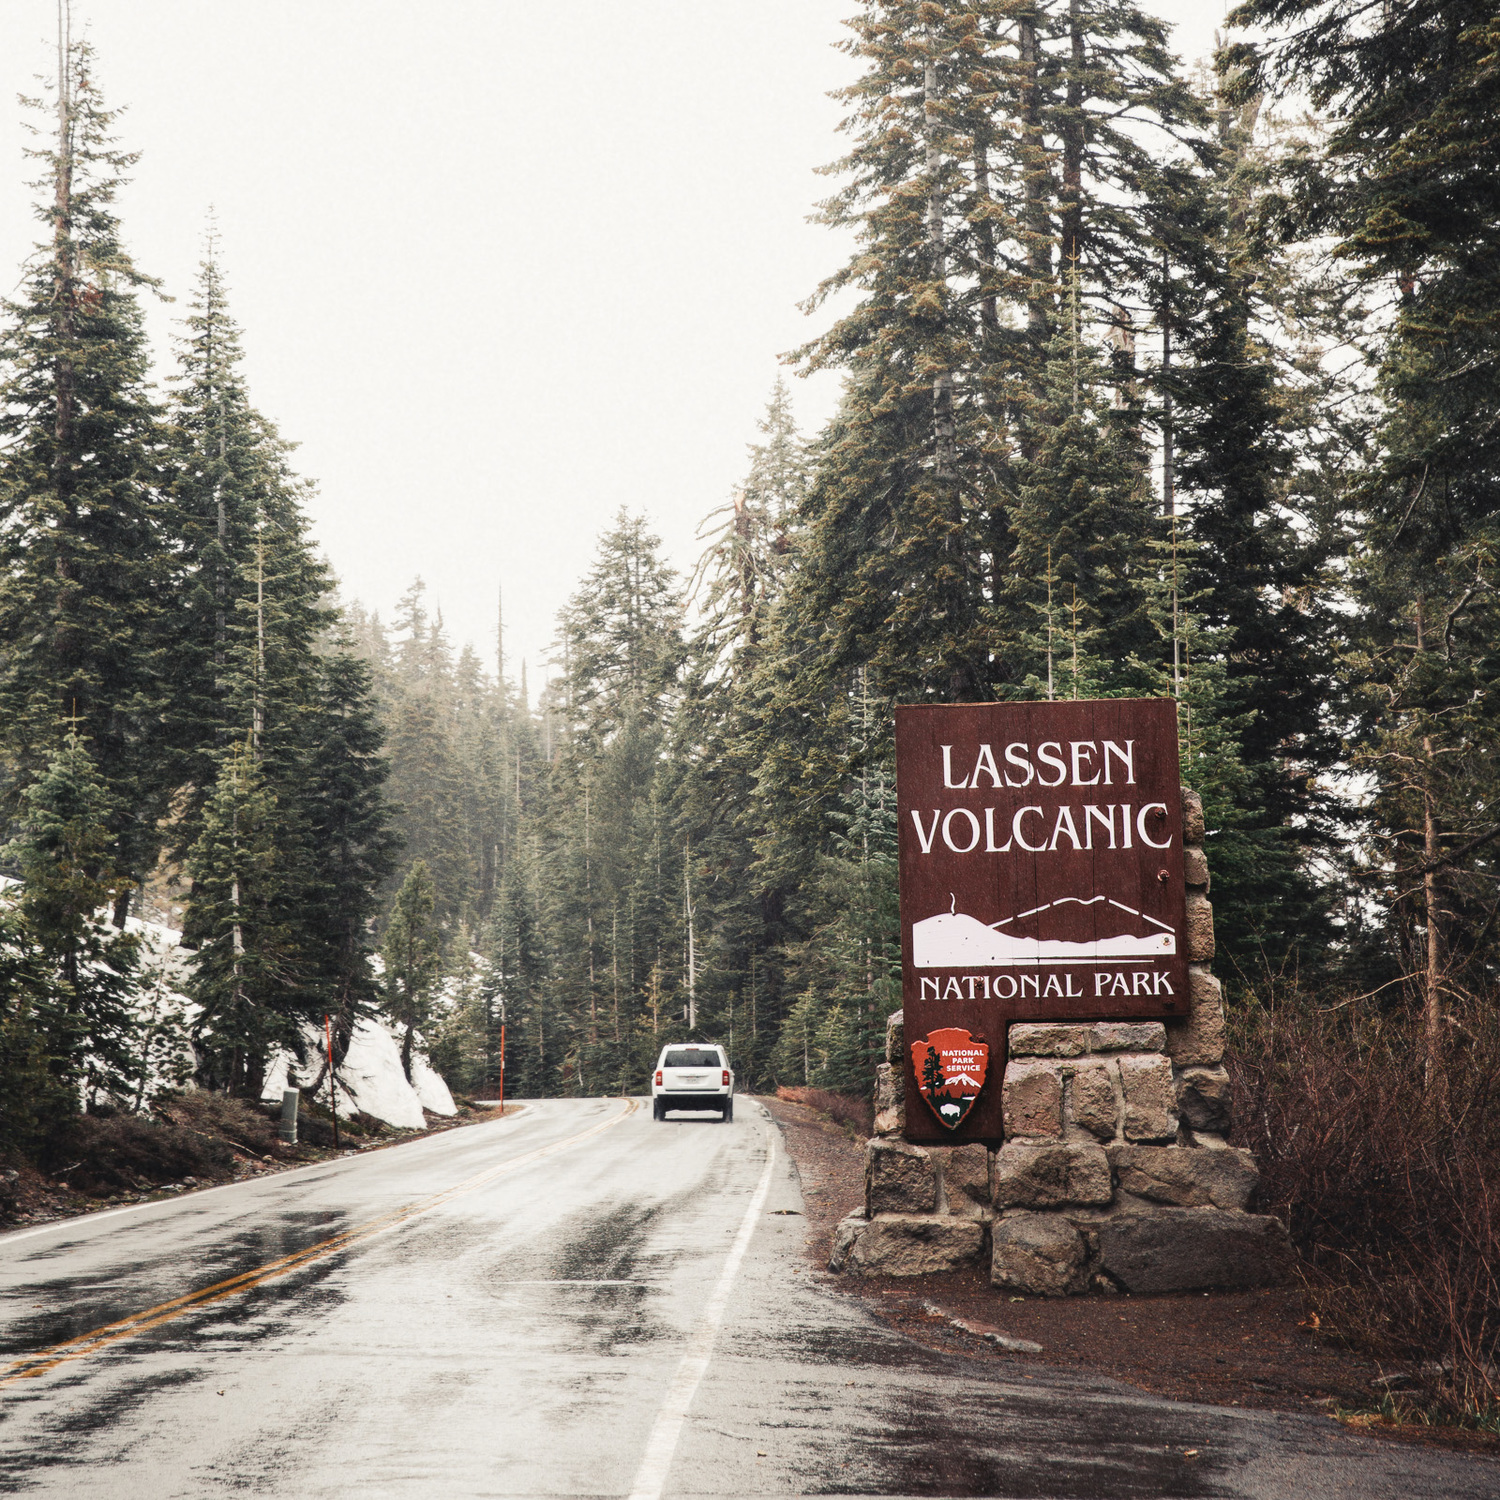 72 hrs in Northern California — FINN BEALES